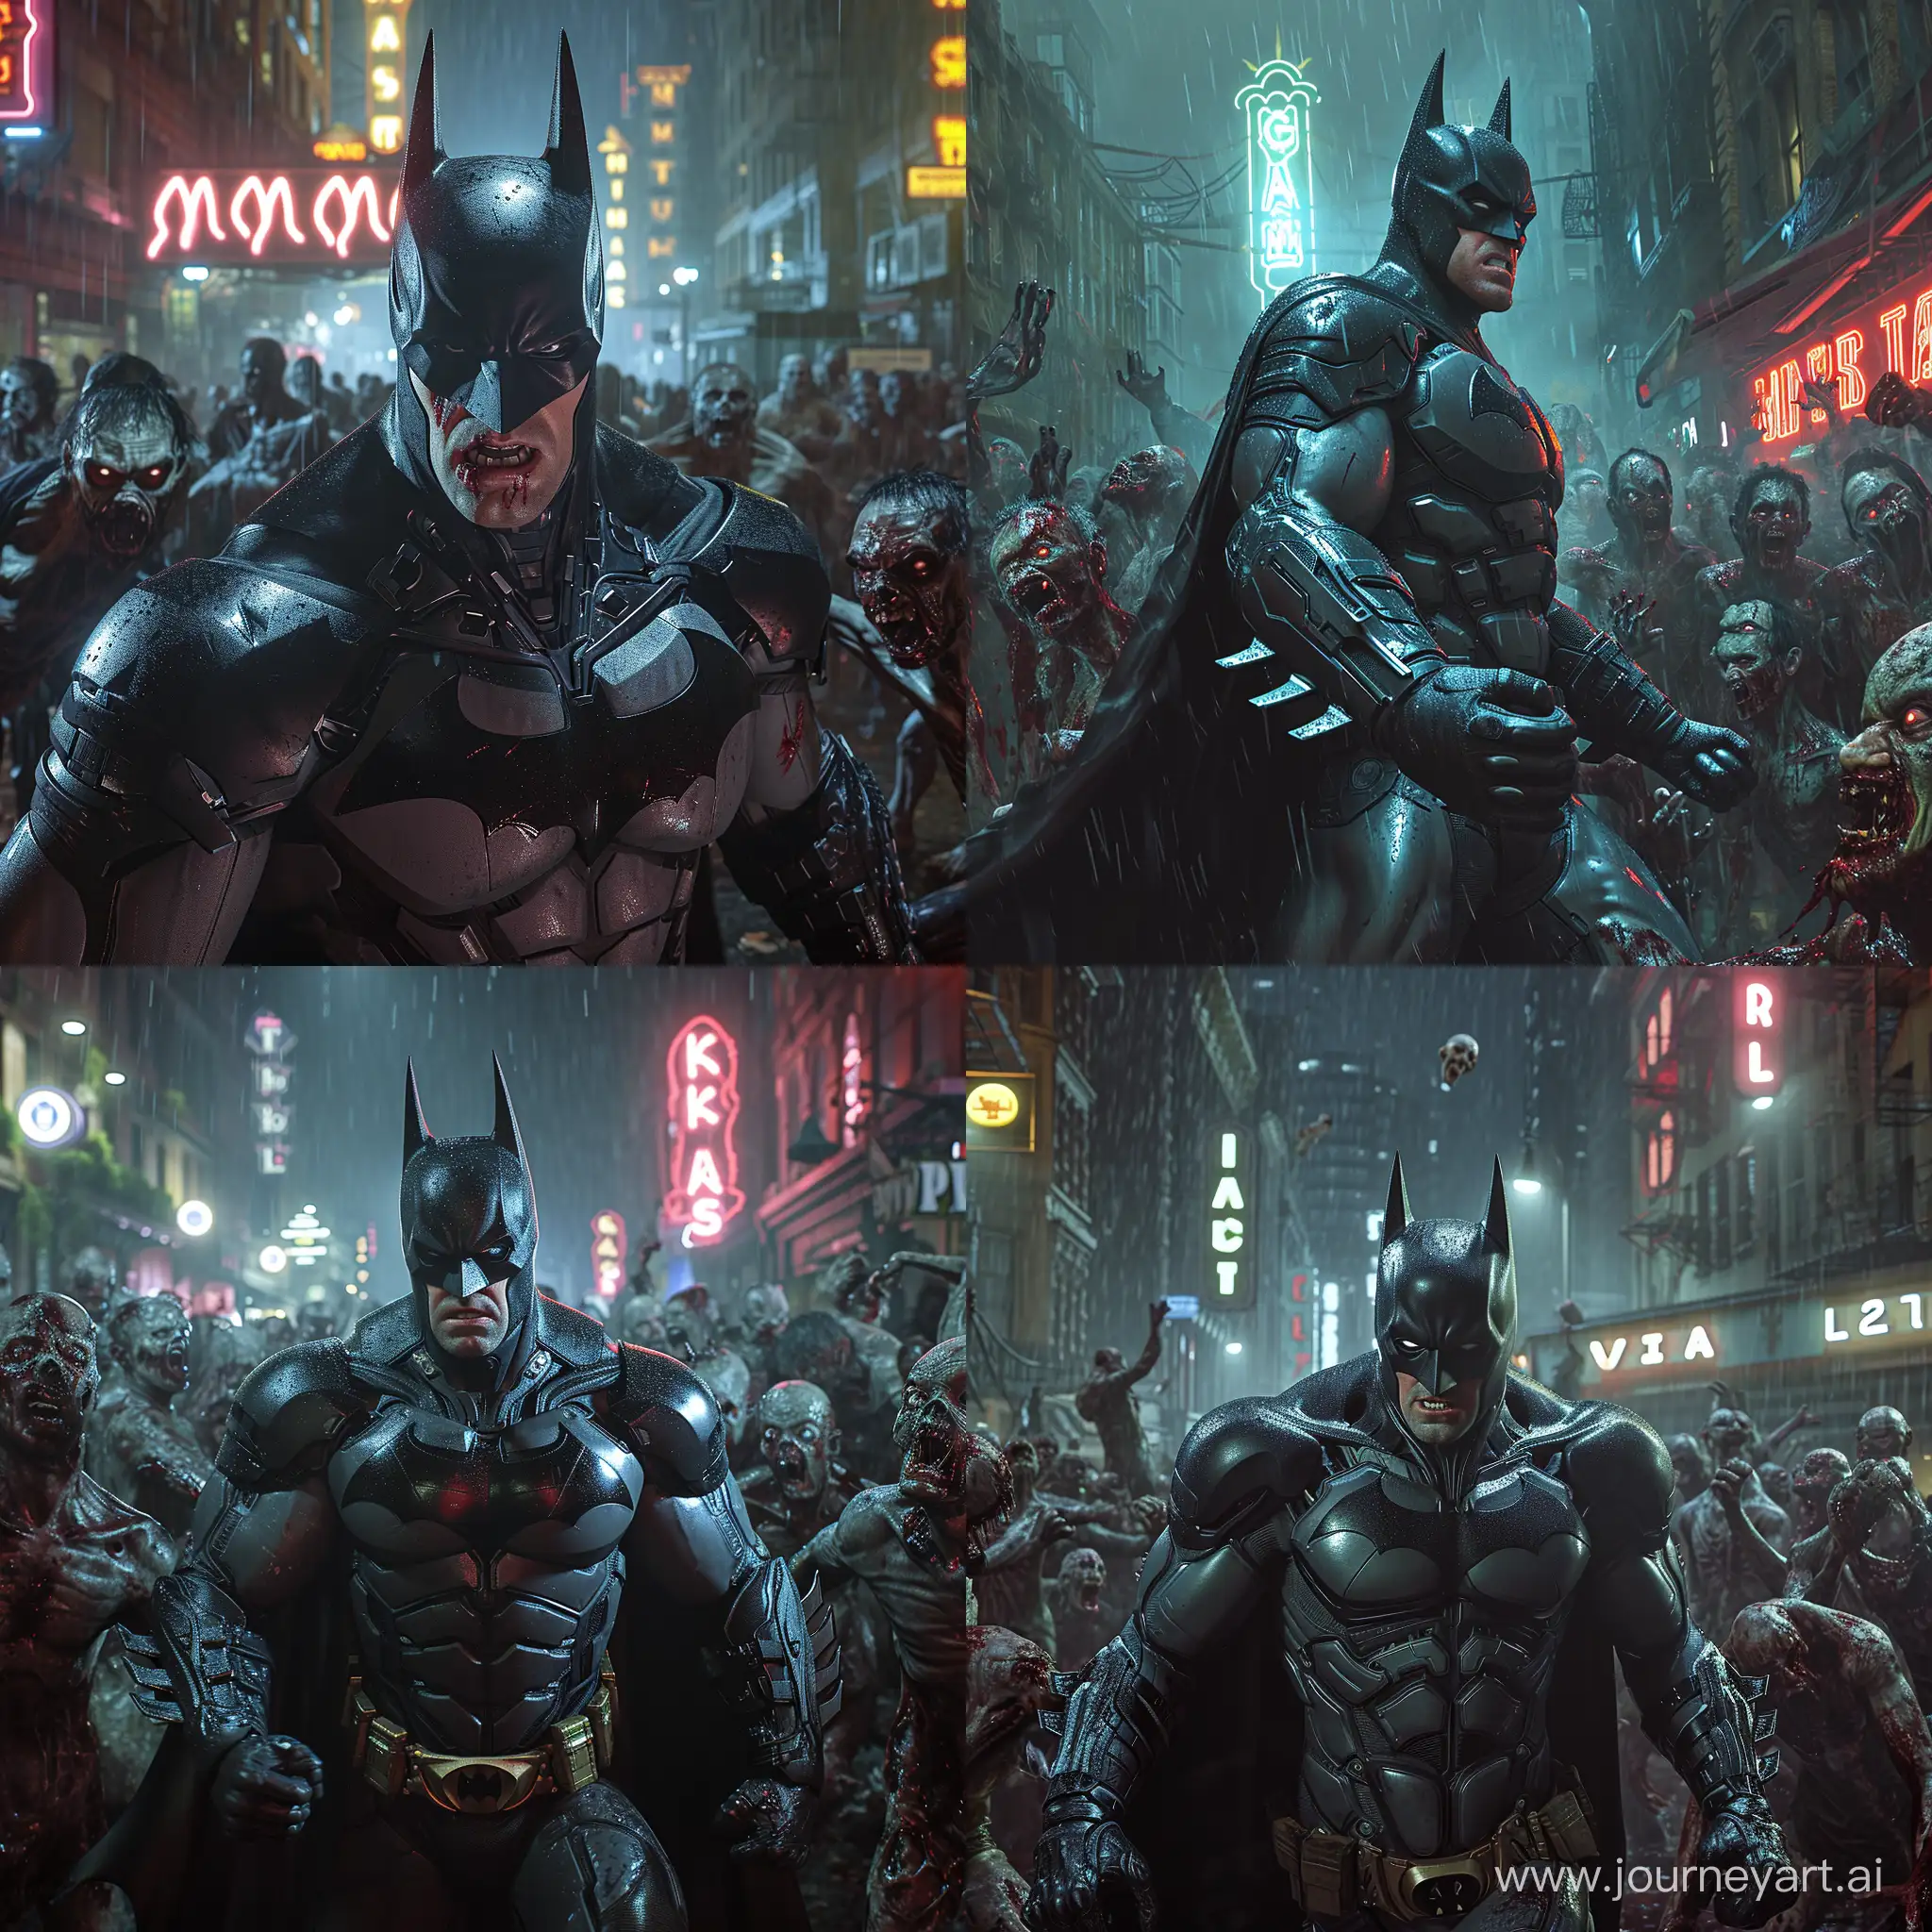 Ultra realistic,batman beyond in a black shining armour,tall and muscular,in a rainy night,neon lighting in the background,obsolete building,fighting zombies,many zombies surrounding batman,the zombies have blood on their eyes and mouth,monstrous,evil,brutal,sony alpha 1 - v6